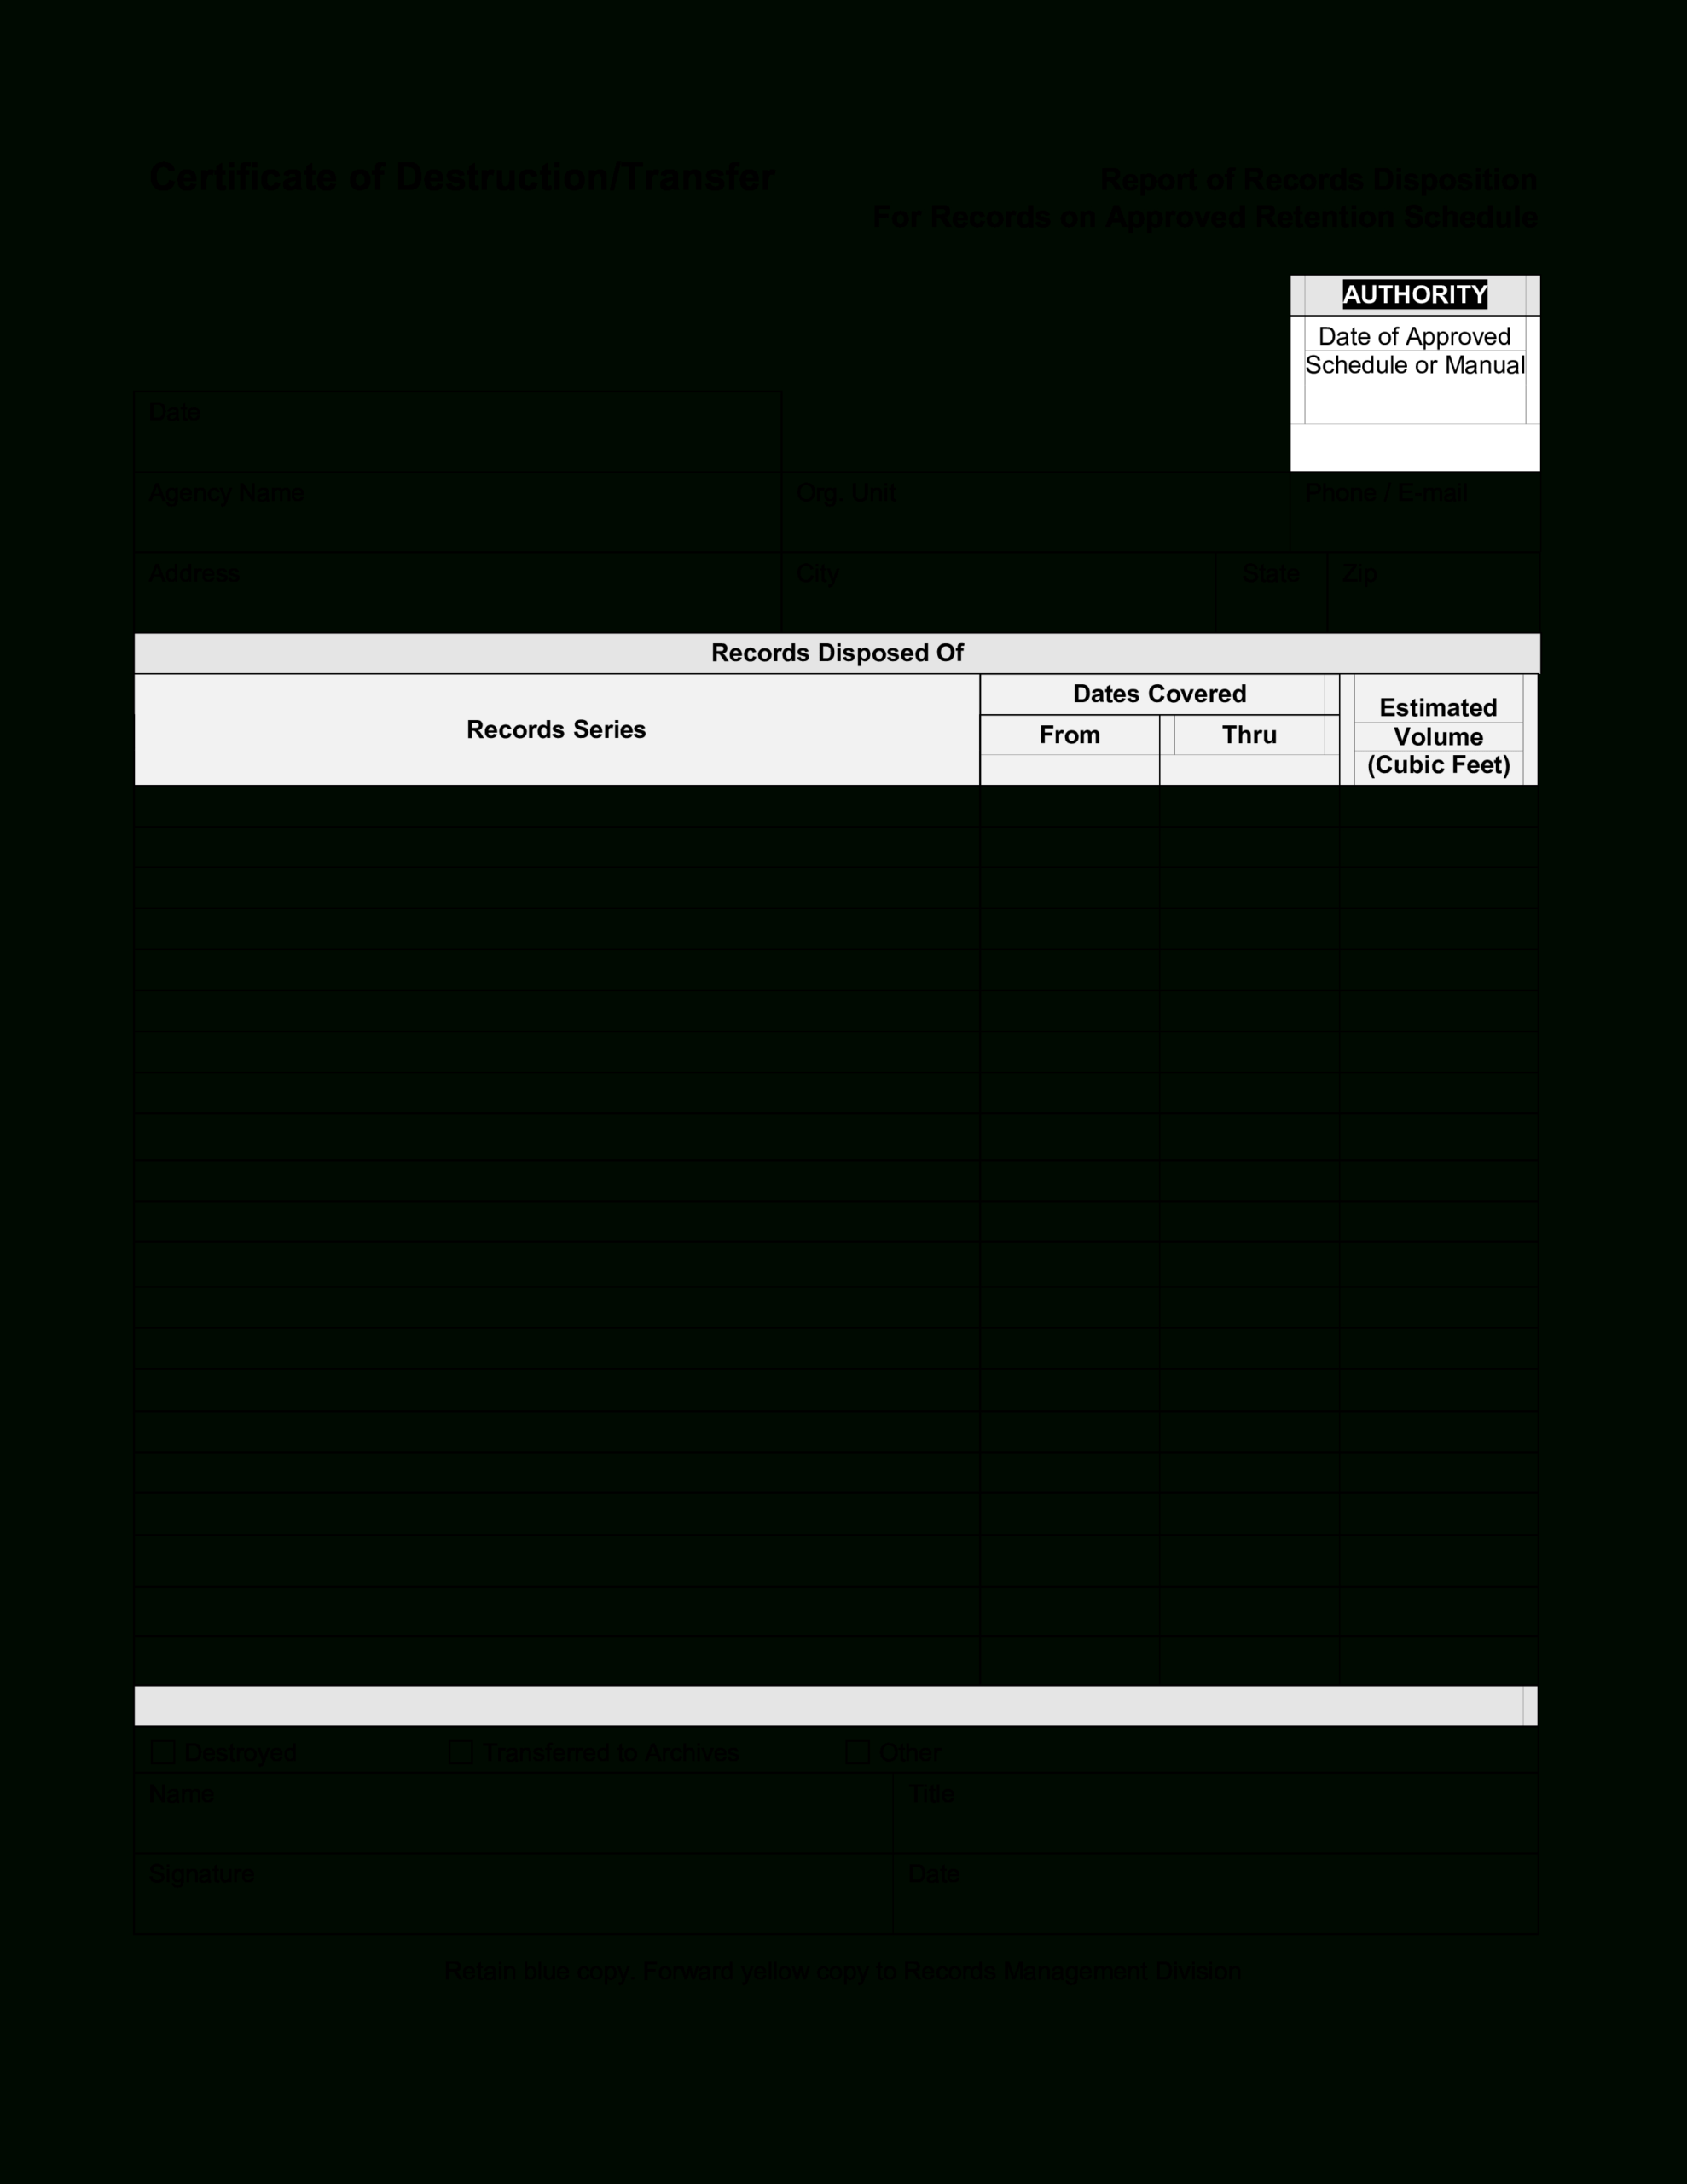 Blank Certificate Of Destruction | Templates At Inside Certificate Of Destruction Template